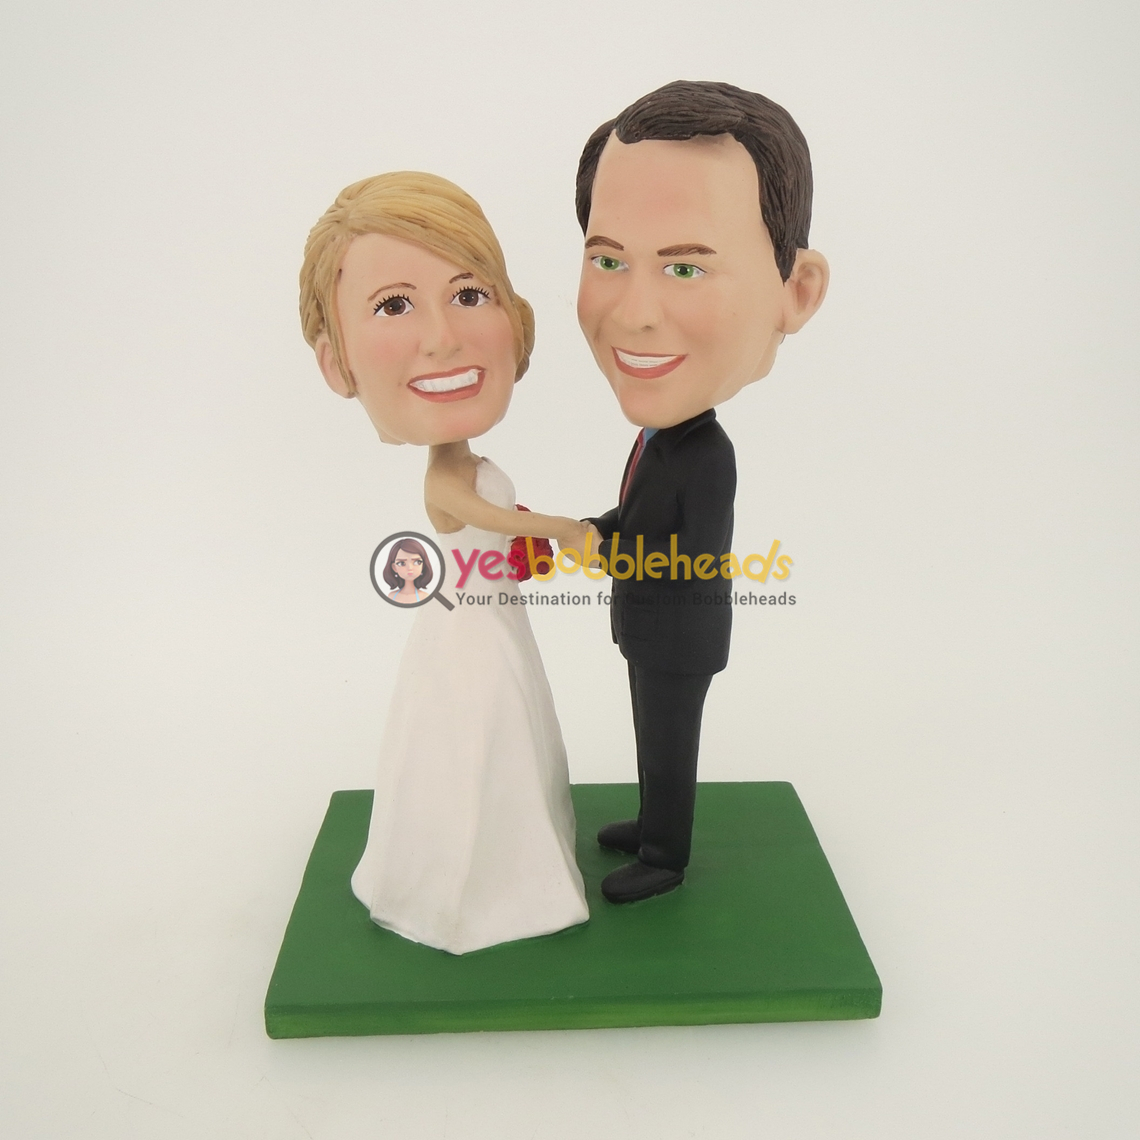 Picture of Custom Bobblehead Doll: Groom Holding Bride's Hands on Wedding